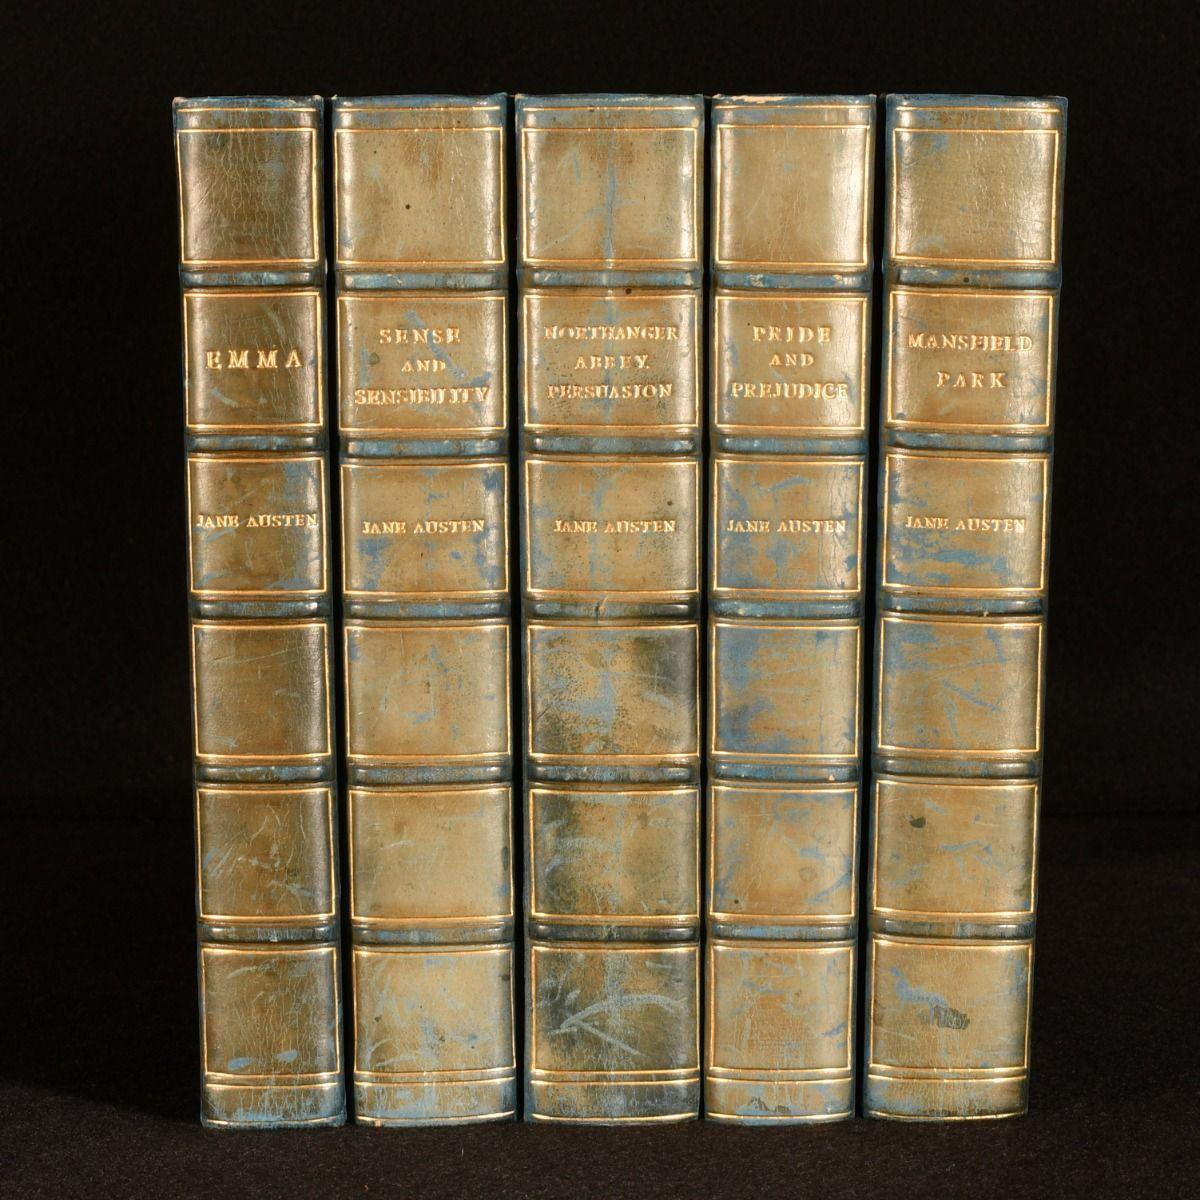 A smart set of the major novels of beloved author, Jane Austen, this set with the lively illustrations of Hugh Thomson.

A smart set containing the major novels of Austen, complete with six novels bound in five volumes.

'Emma', published in 1901,